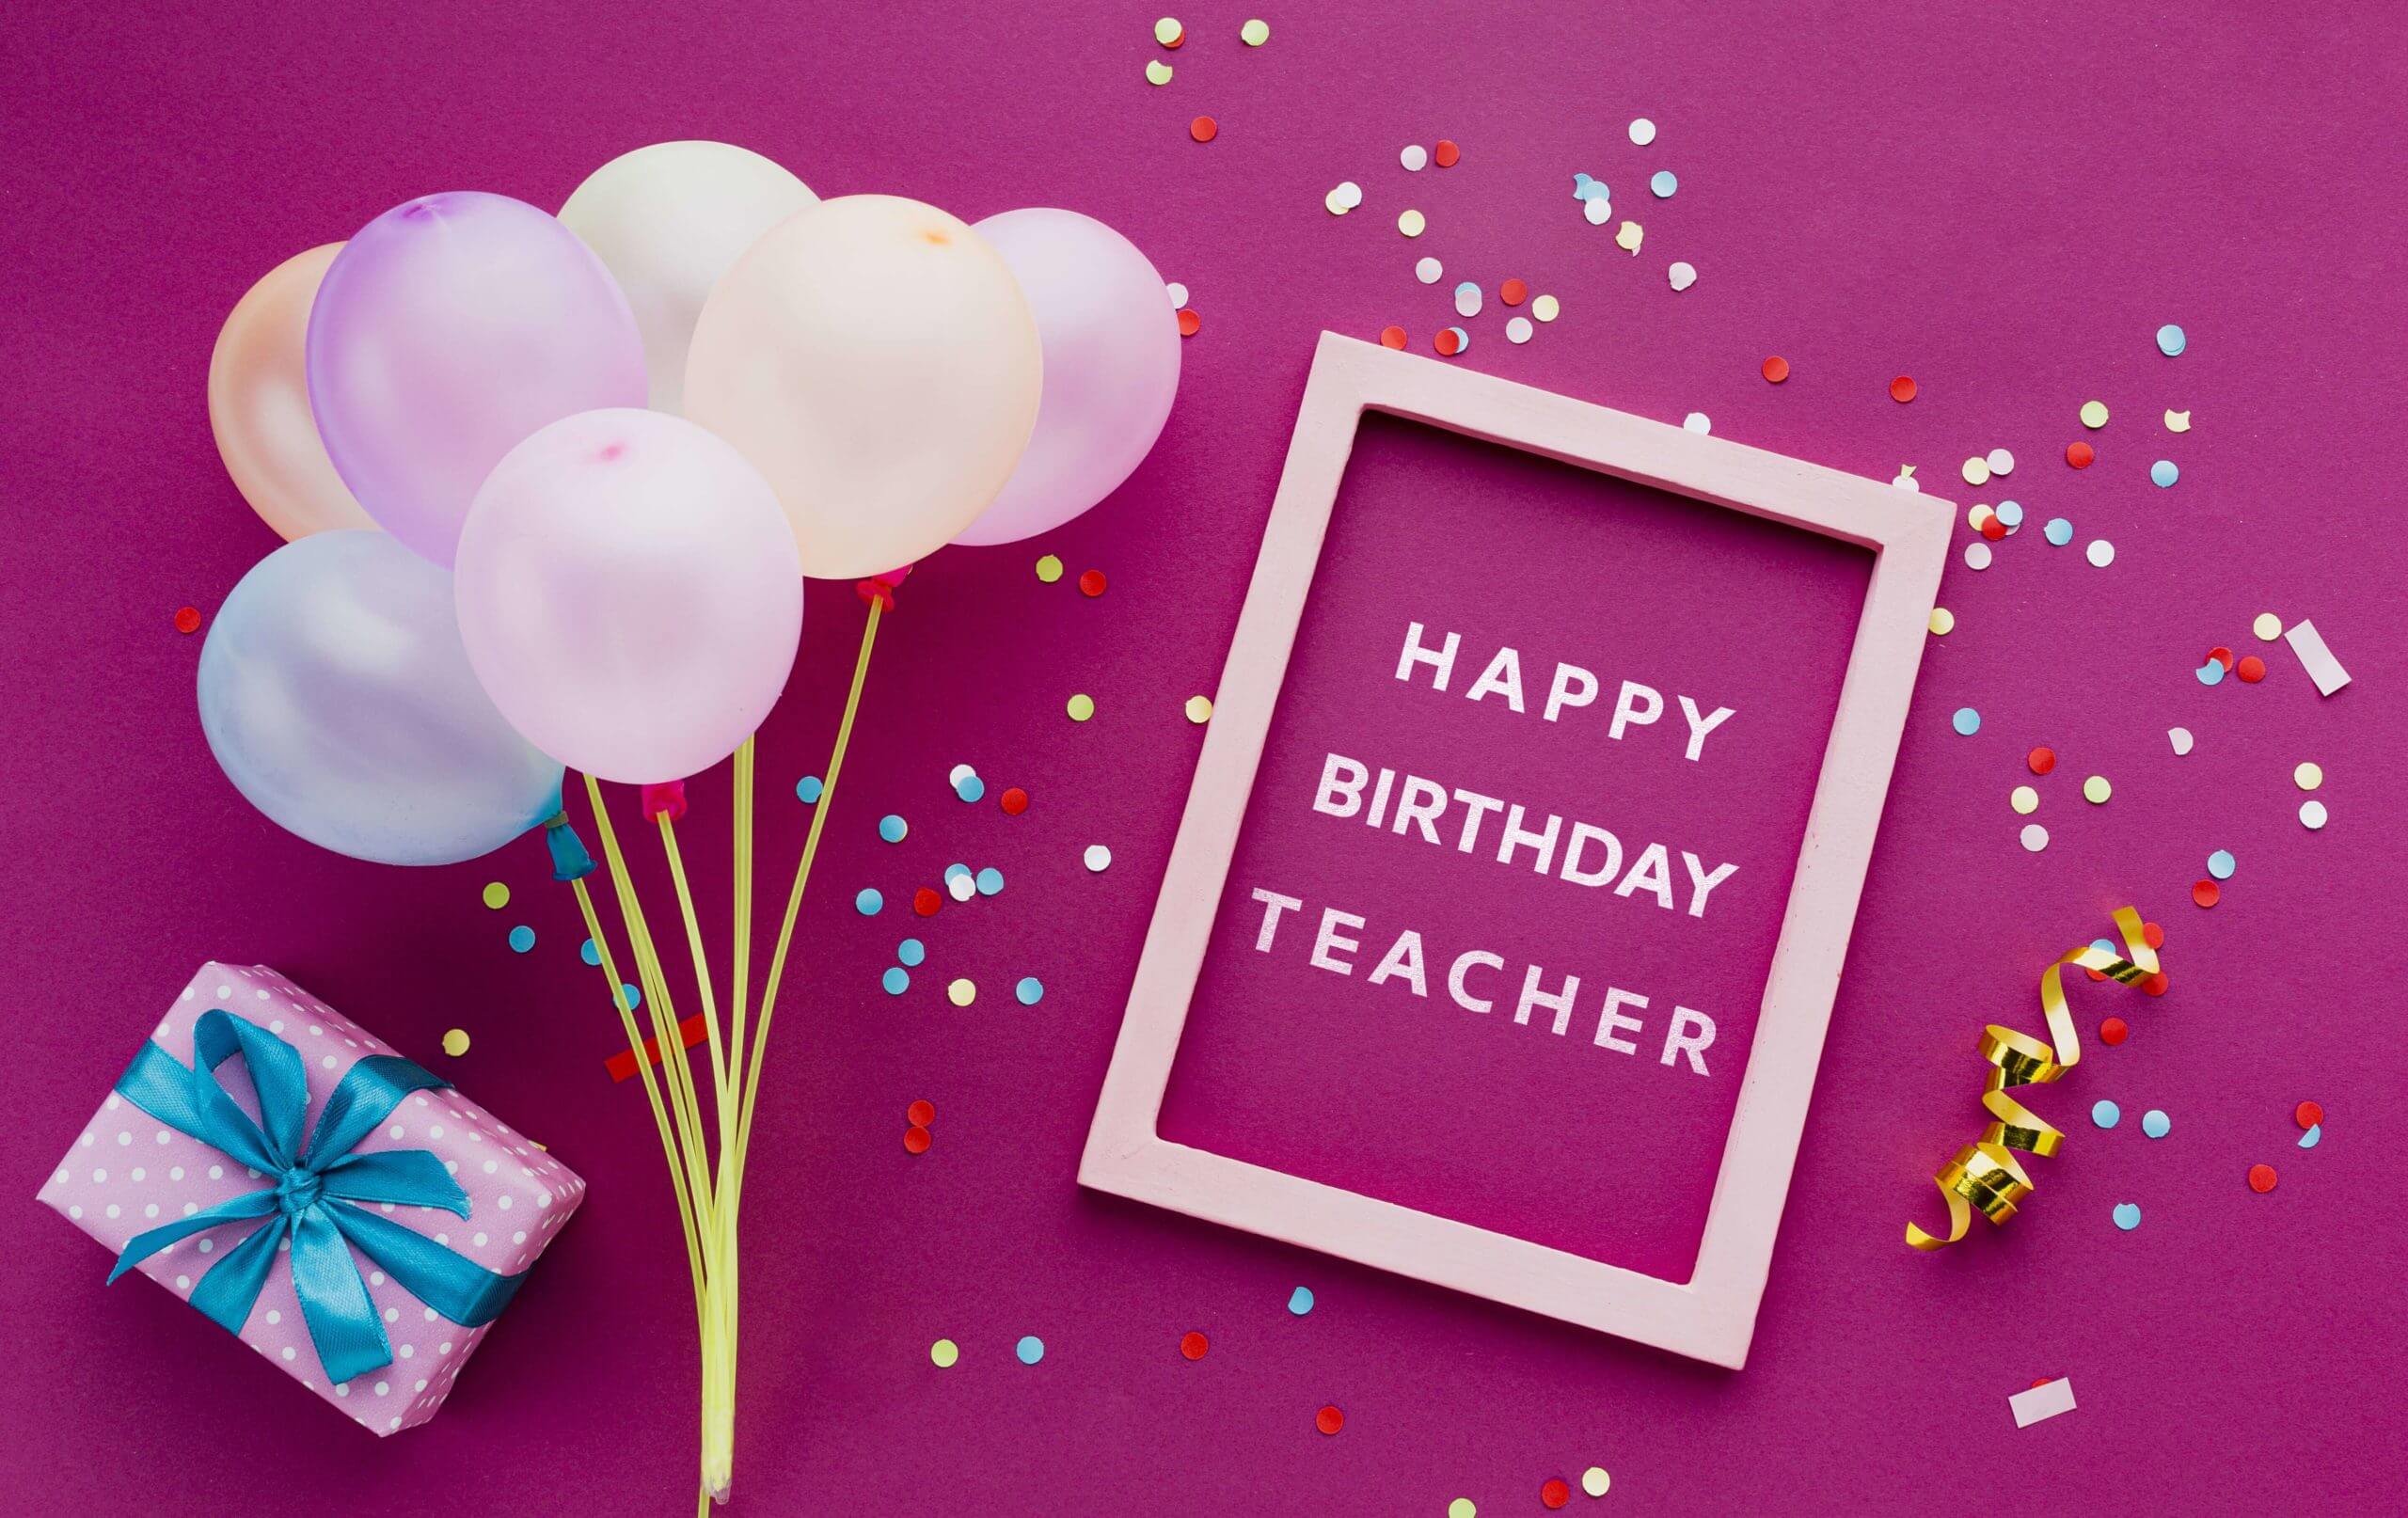 happy-birthday-teacher-birthday-cards-images-wishes-and-greetings